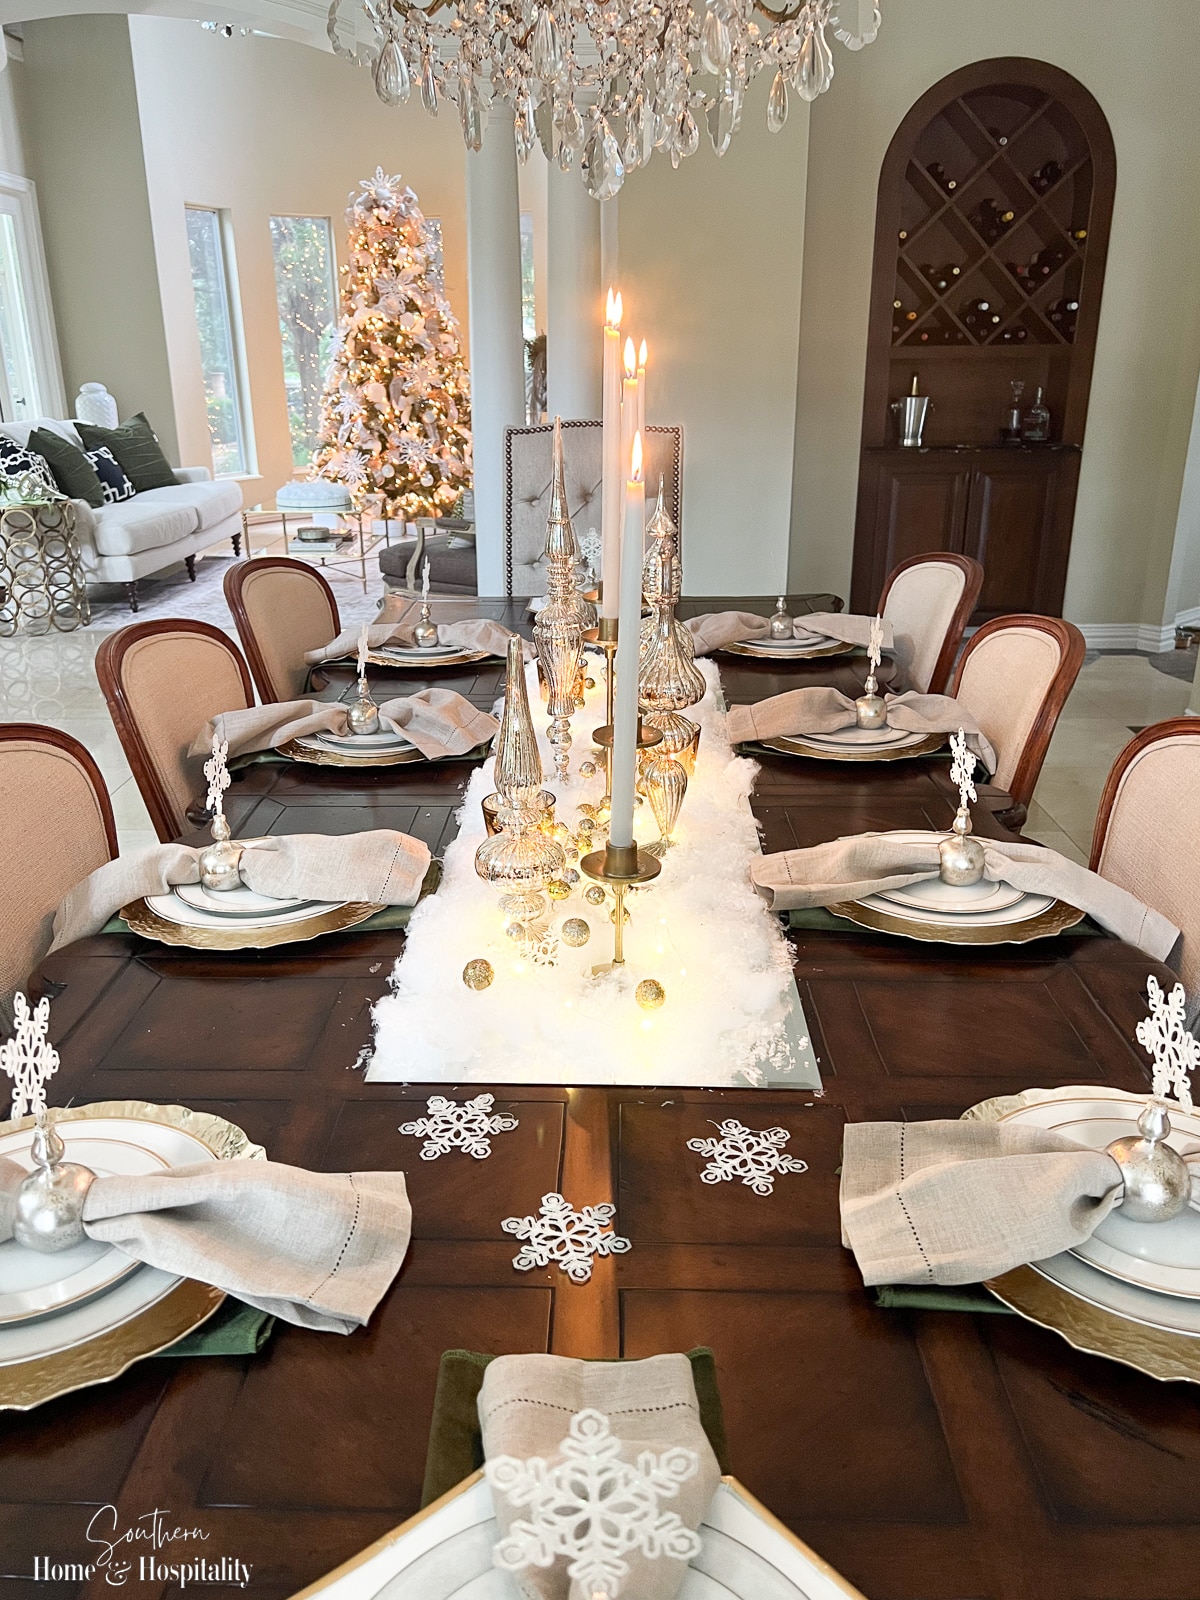 How to Create an Elegant White and Gold Holiday Table